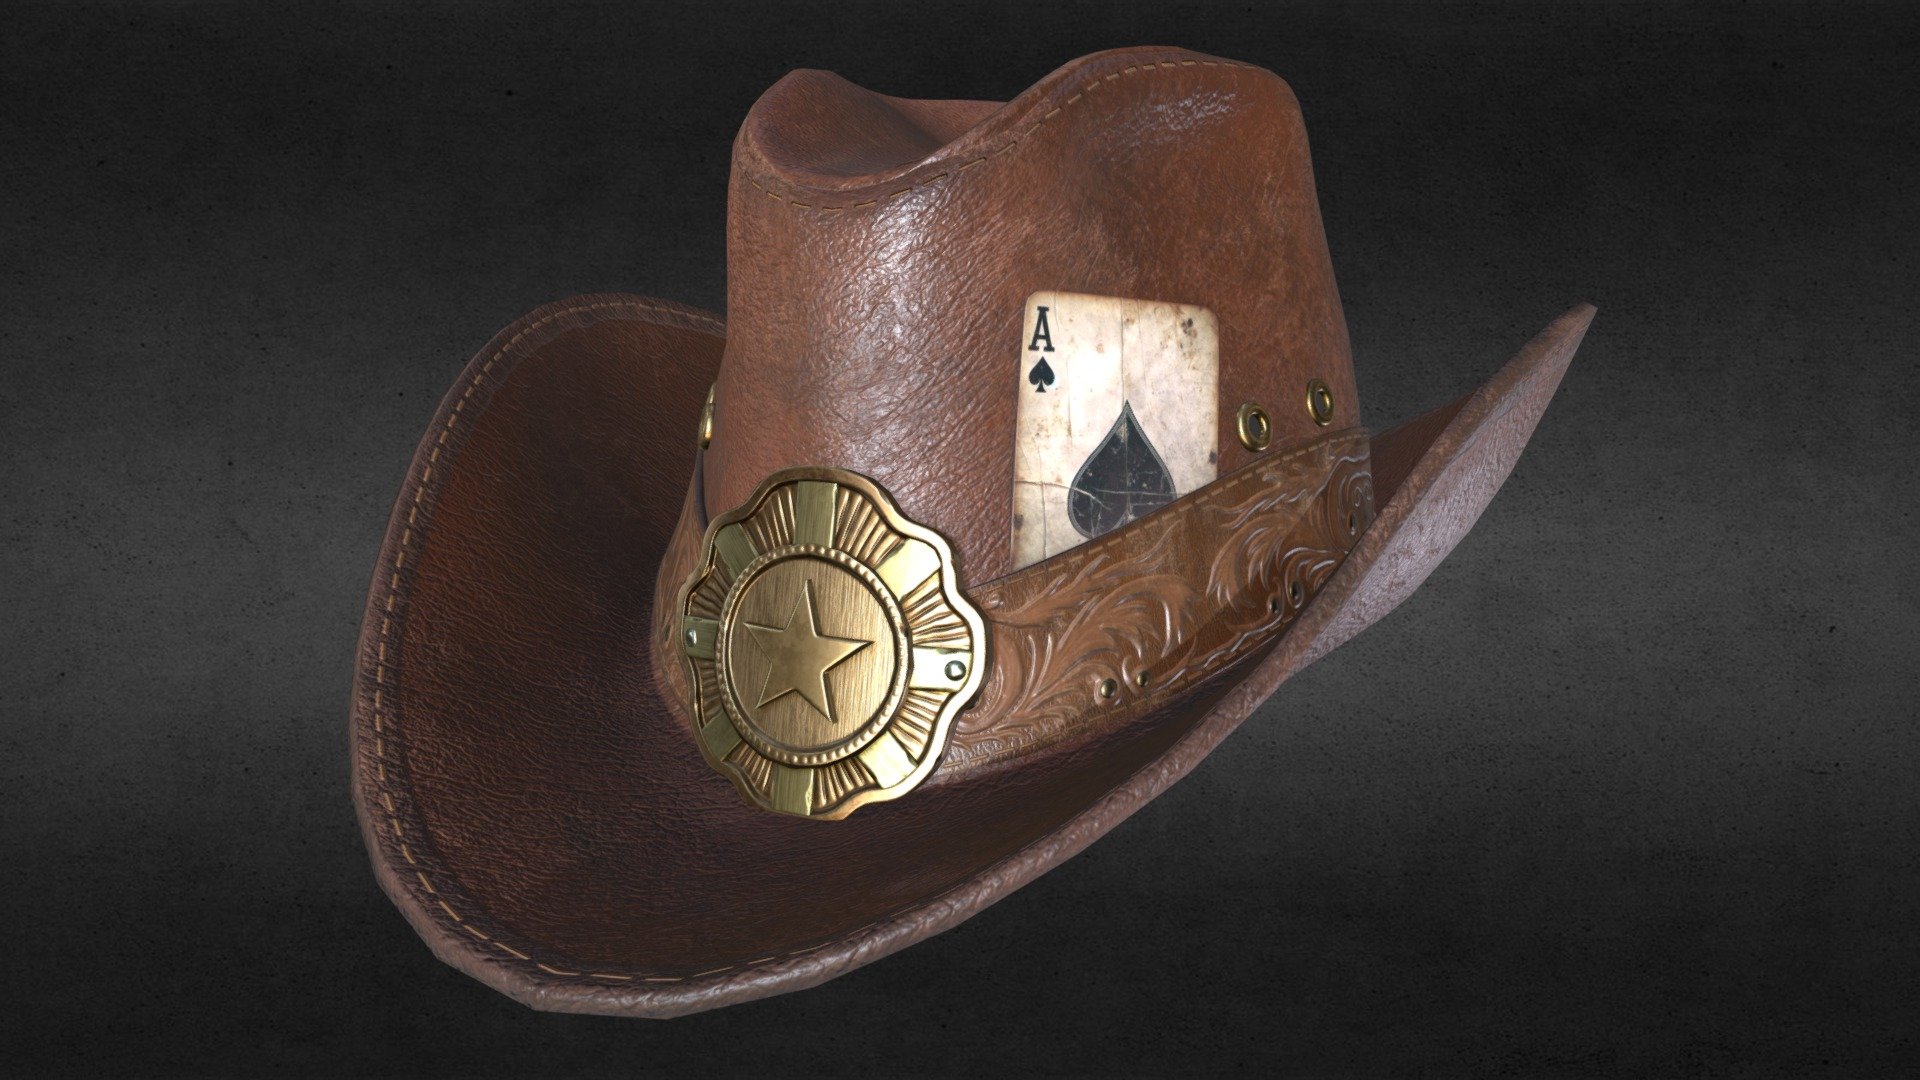 This intricately designed 3D model of a cowboy hat combines the rugged charm of the Wild West with the polish of modern craftsmanship. The hat boasts a rich, chocolate-brown leather texture that exudes quality and durability. Adorning the side is a striking sheriff's badge, detailed with an embossed star at the center, that adds an authentic touch of law and order to the design. Tucked into the hatband is an ace of spades card, a nod to the gambler's spirit and a symbol of good luck. Style reference game Red Dead Redemption 2.
Whether you are game developers, filmmakers, or virtual reality creators, this cowboy hat model is versatile for various applications, from character design to scene setting. Its high resolution and detailed texturing make it a standout addition to any digital 3d model